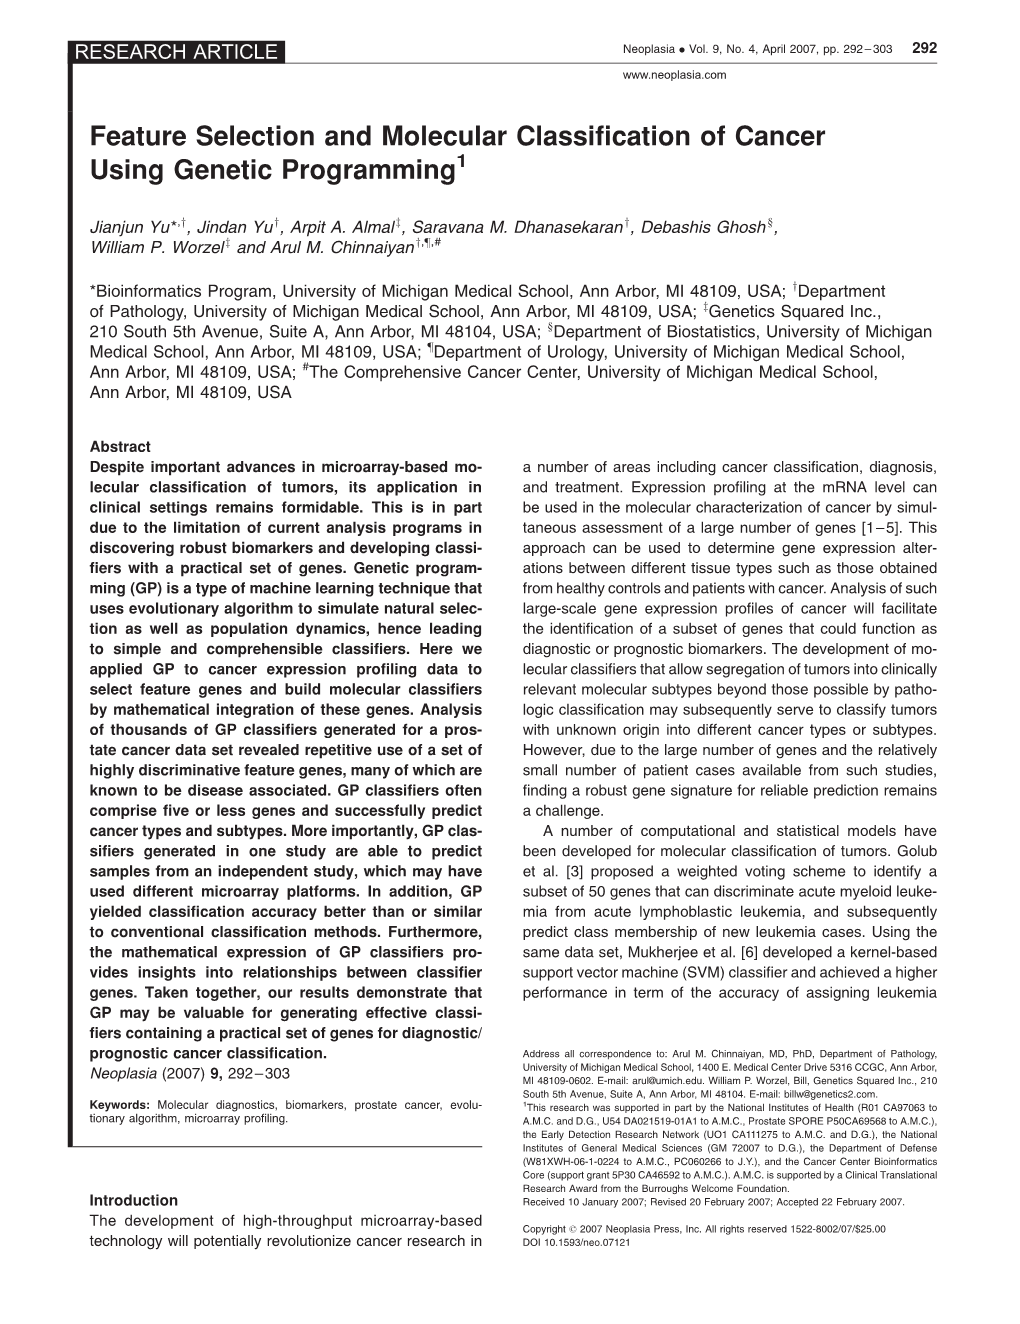 Feature Selection and Molecular Classification of Cancer Using Genetic Programming1